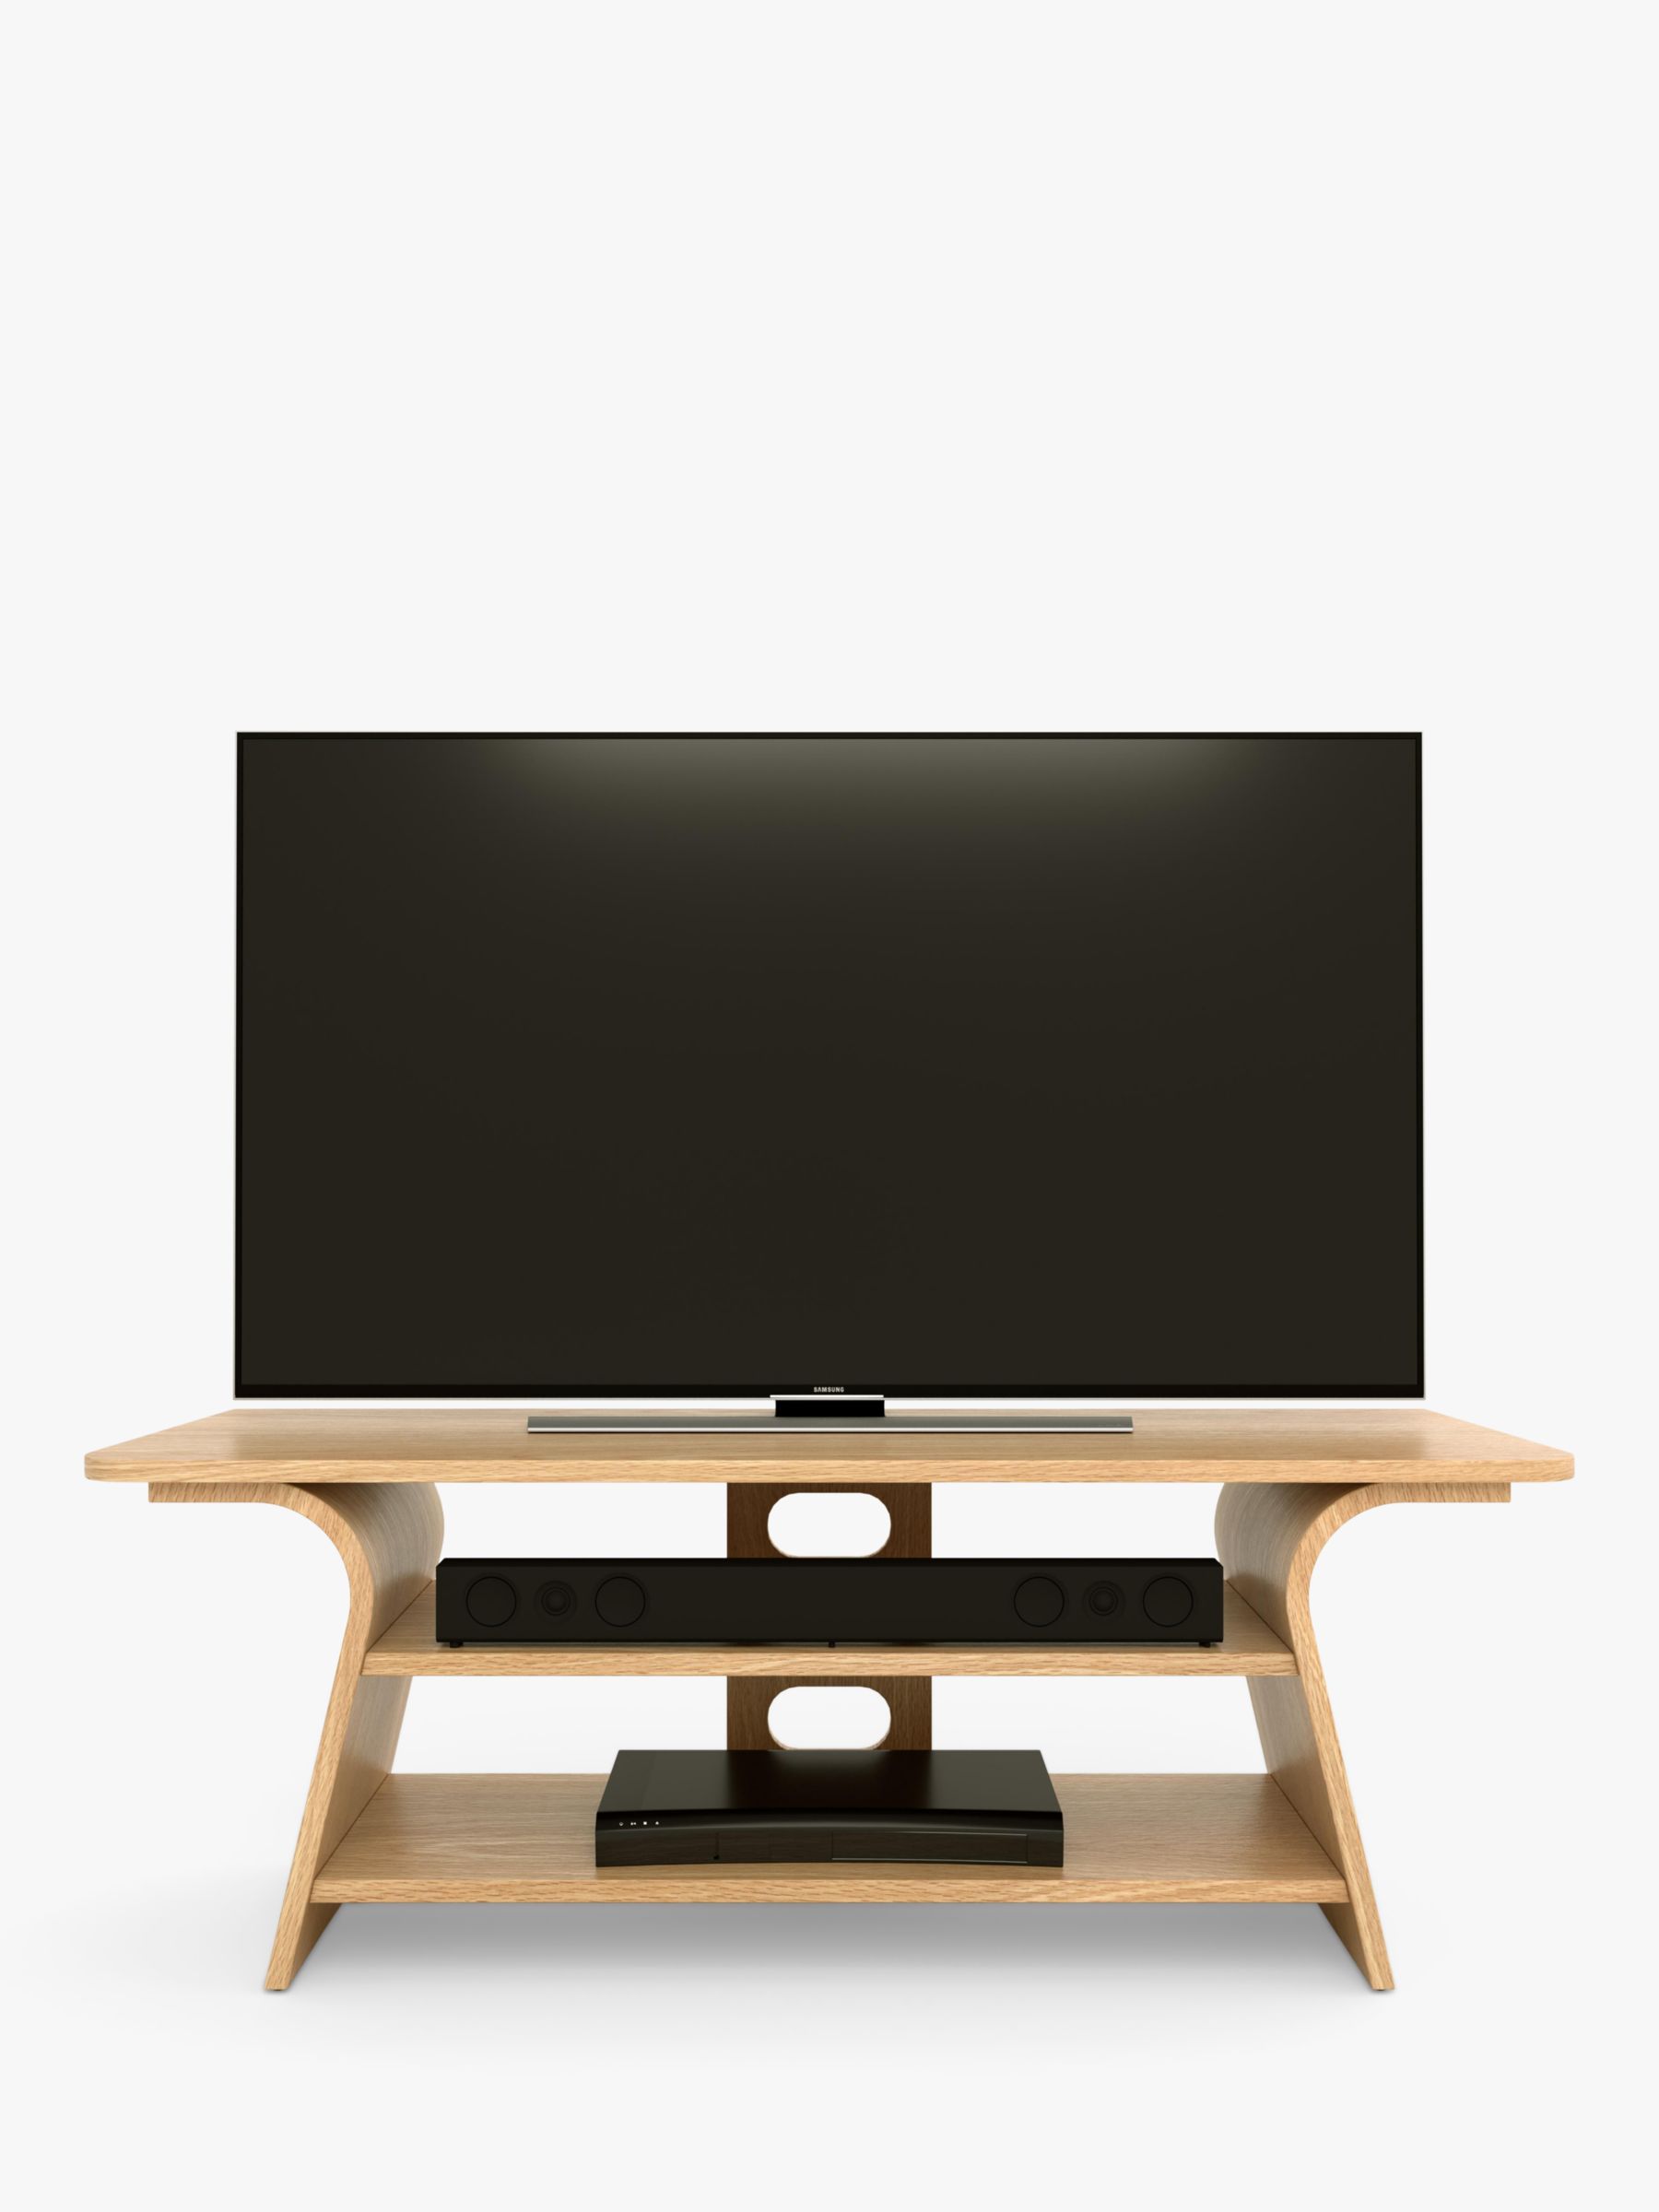 Photo of Tom schneider chloe 1250 tv stand for tvs up to 55